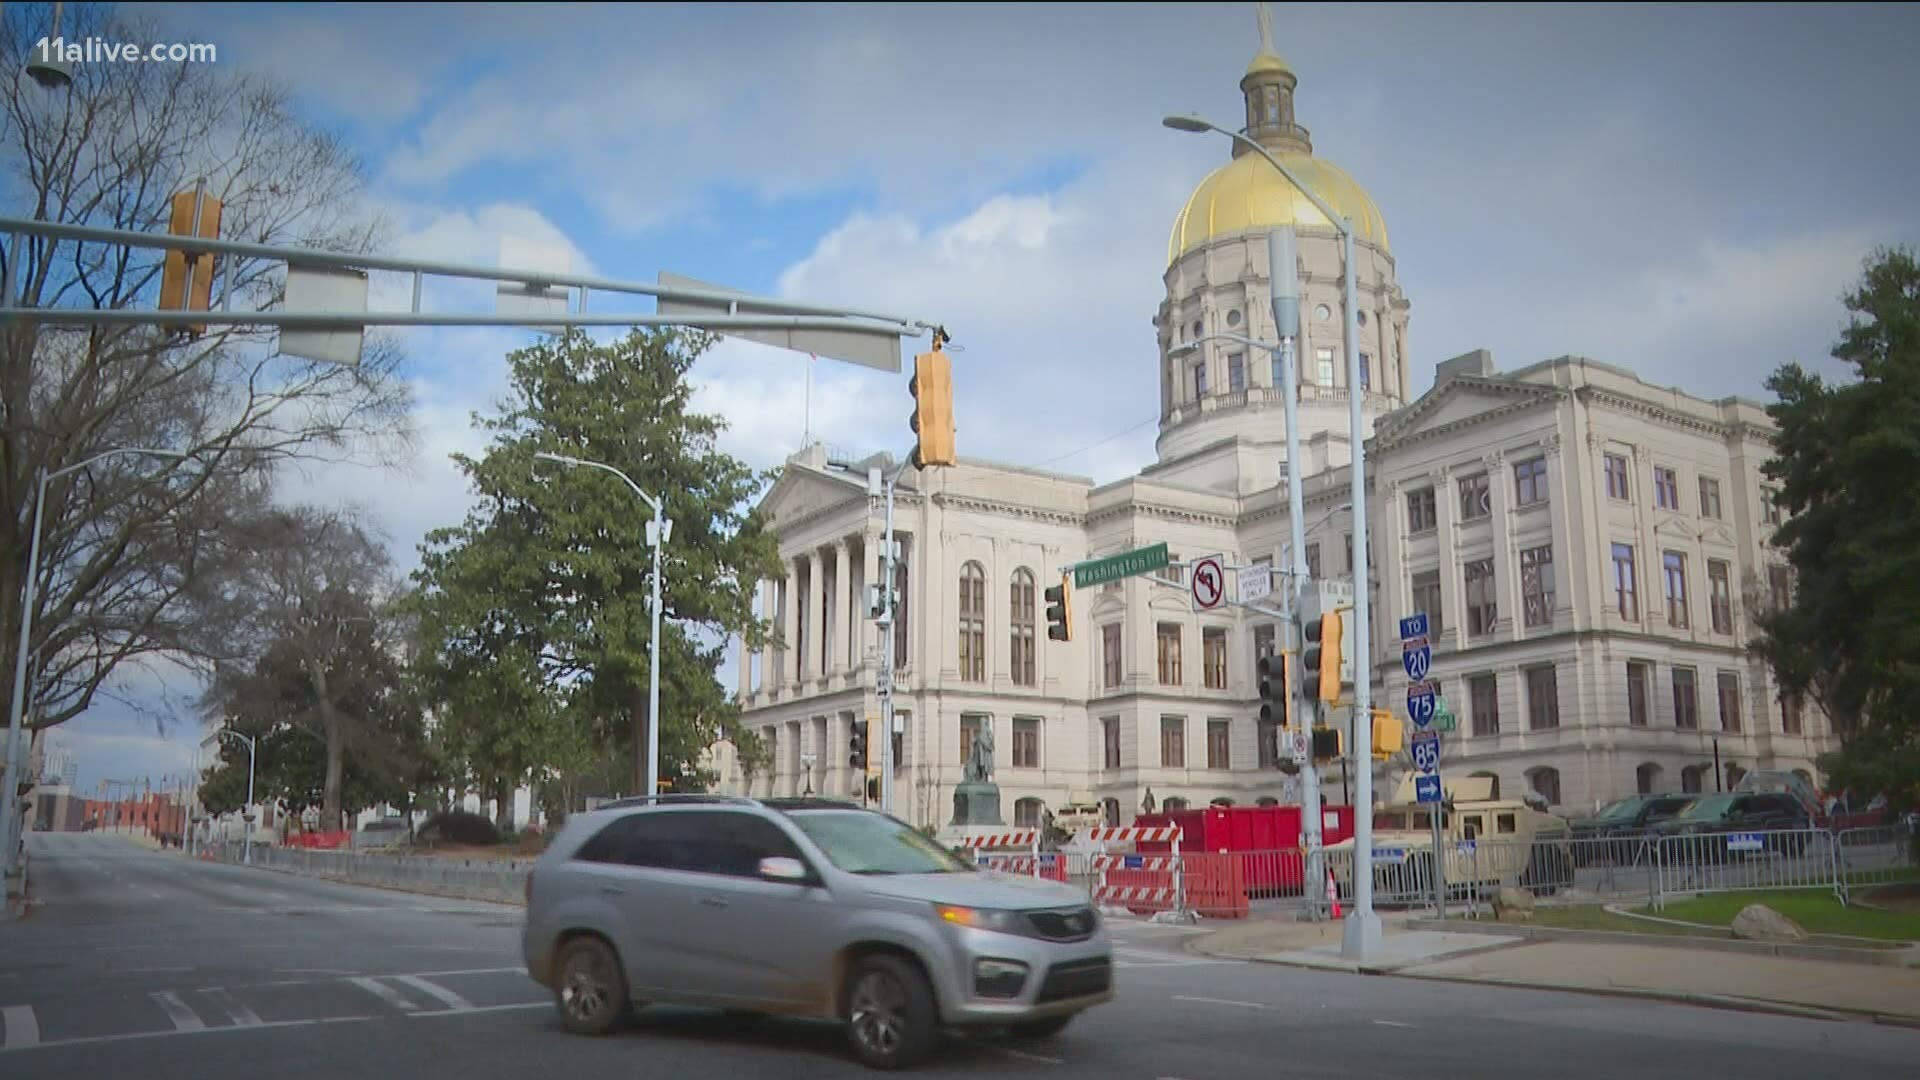 Our 11Alive financial expert said most Georgians wouldn't feel a direct impact from the plan.